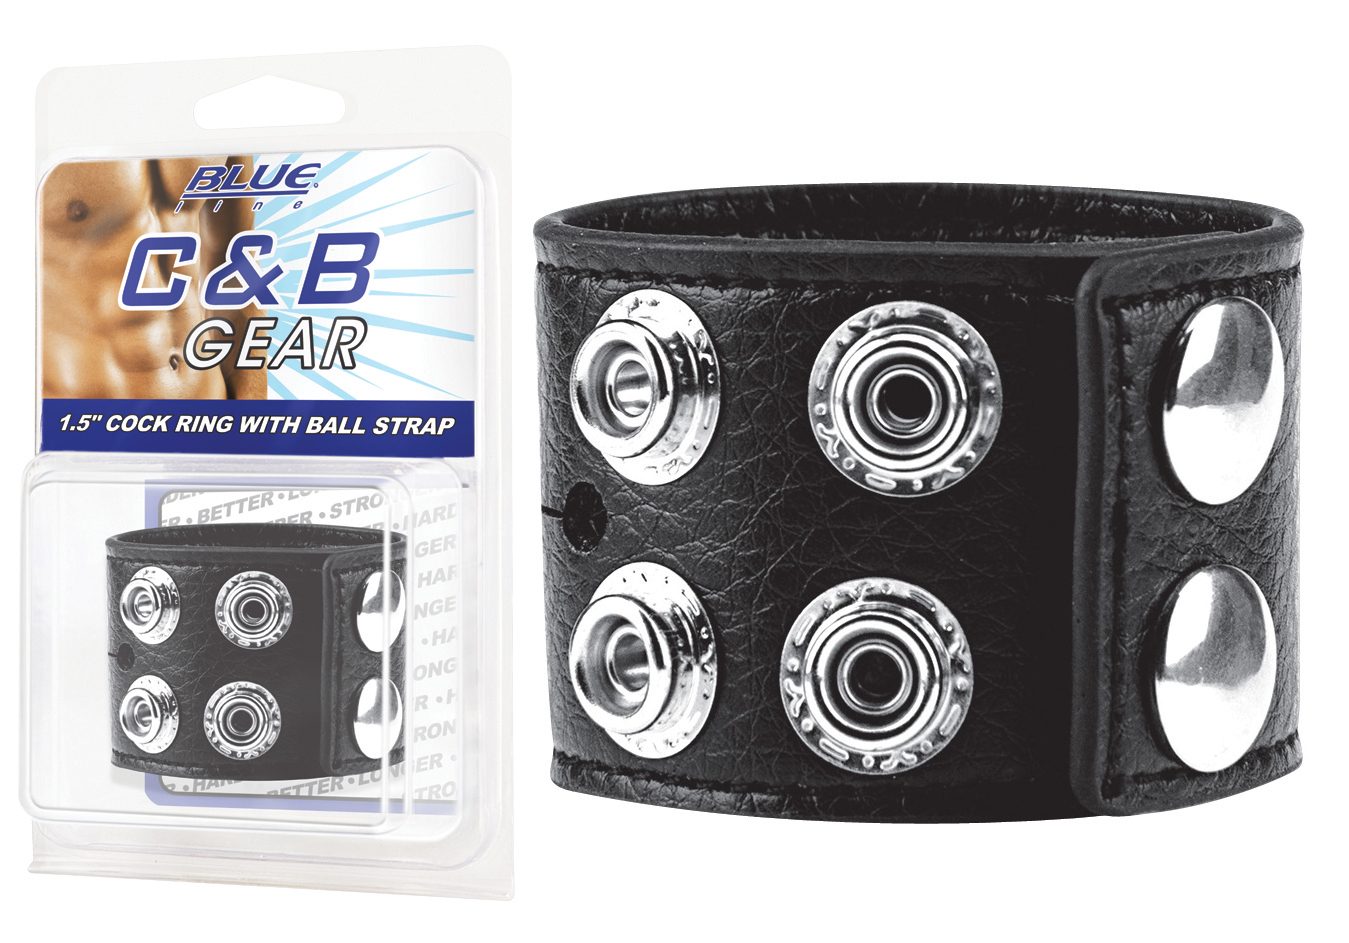 BLUE LINE C&B GEAR 1,5'" Cock Ring With Ball Strap